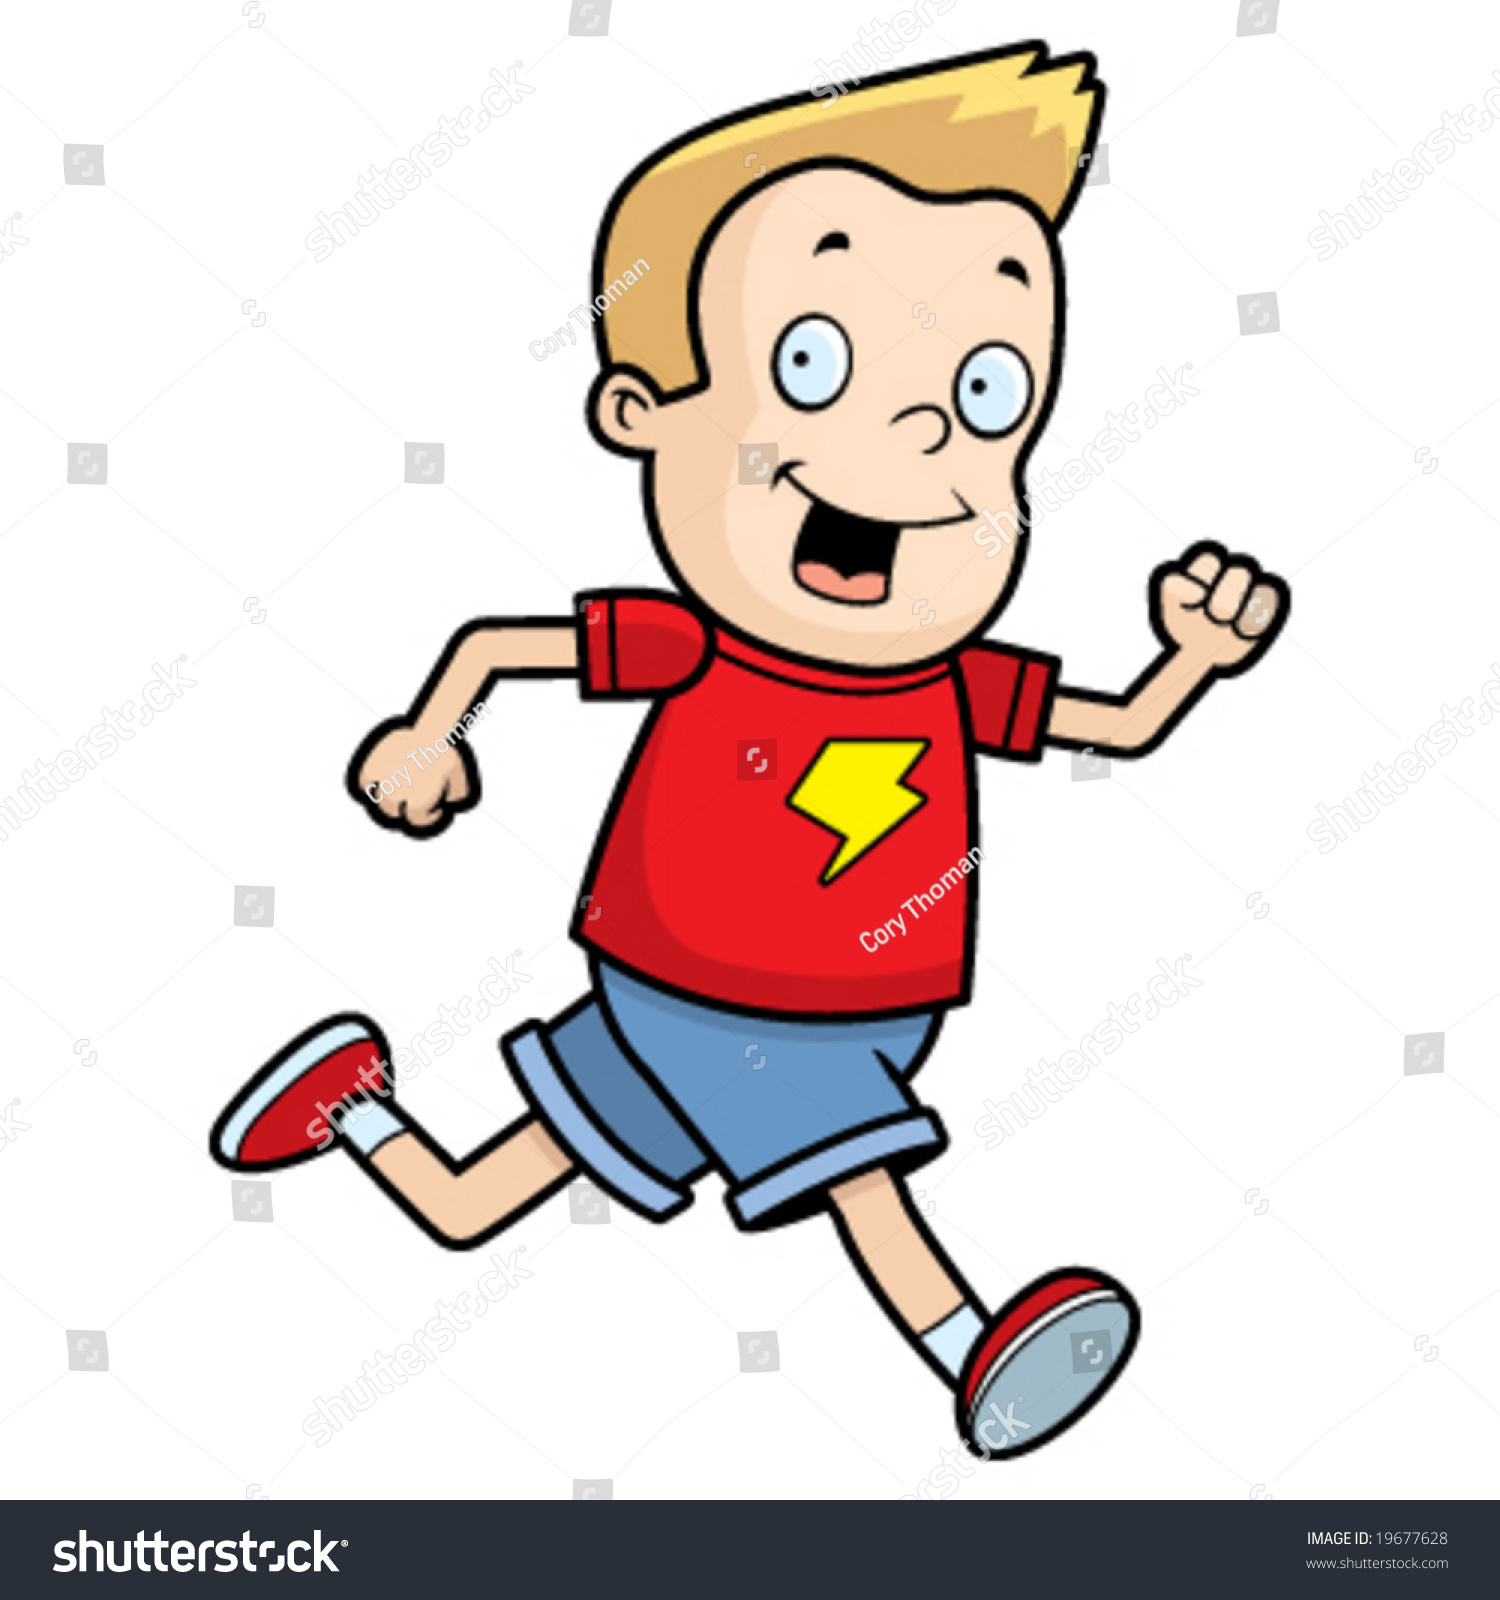 boy and girl running clipart - photo #29